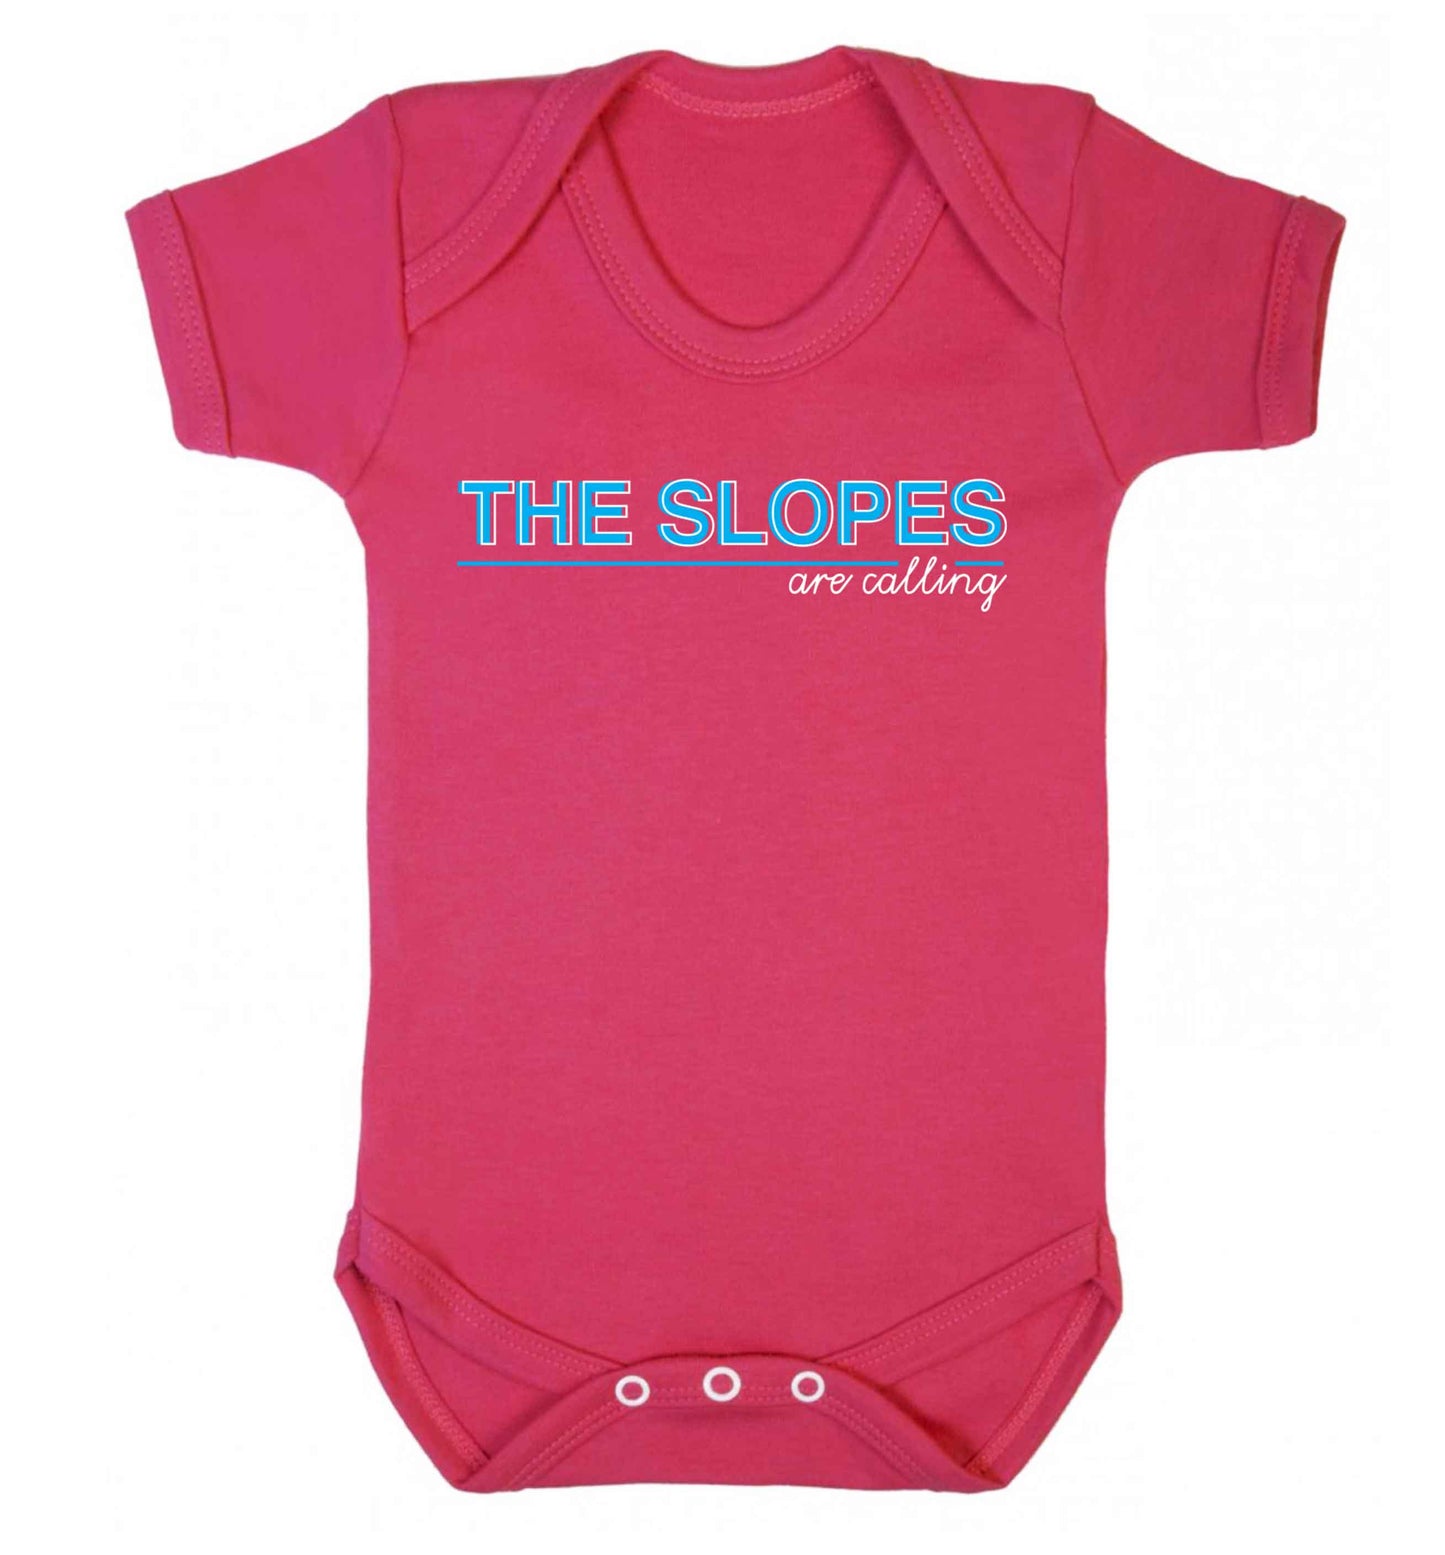 The slopes are calling Baby Vest dark pink 18-24 months